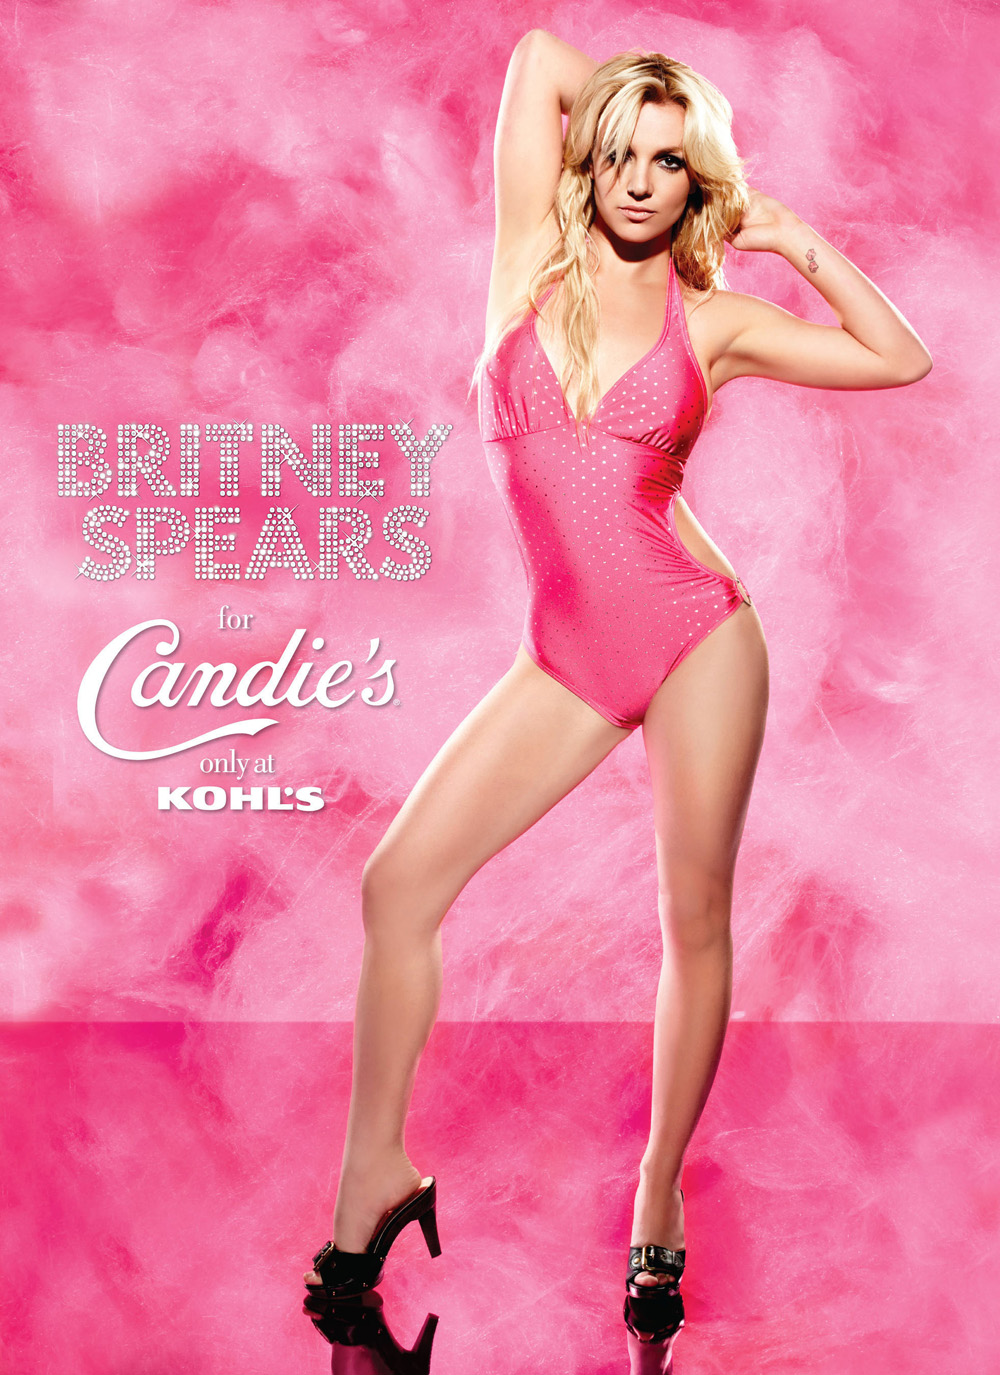 At Kohl’s: Seeing Britney Spears in a Different Light